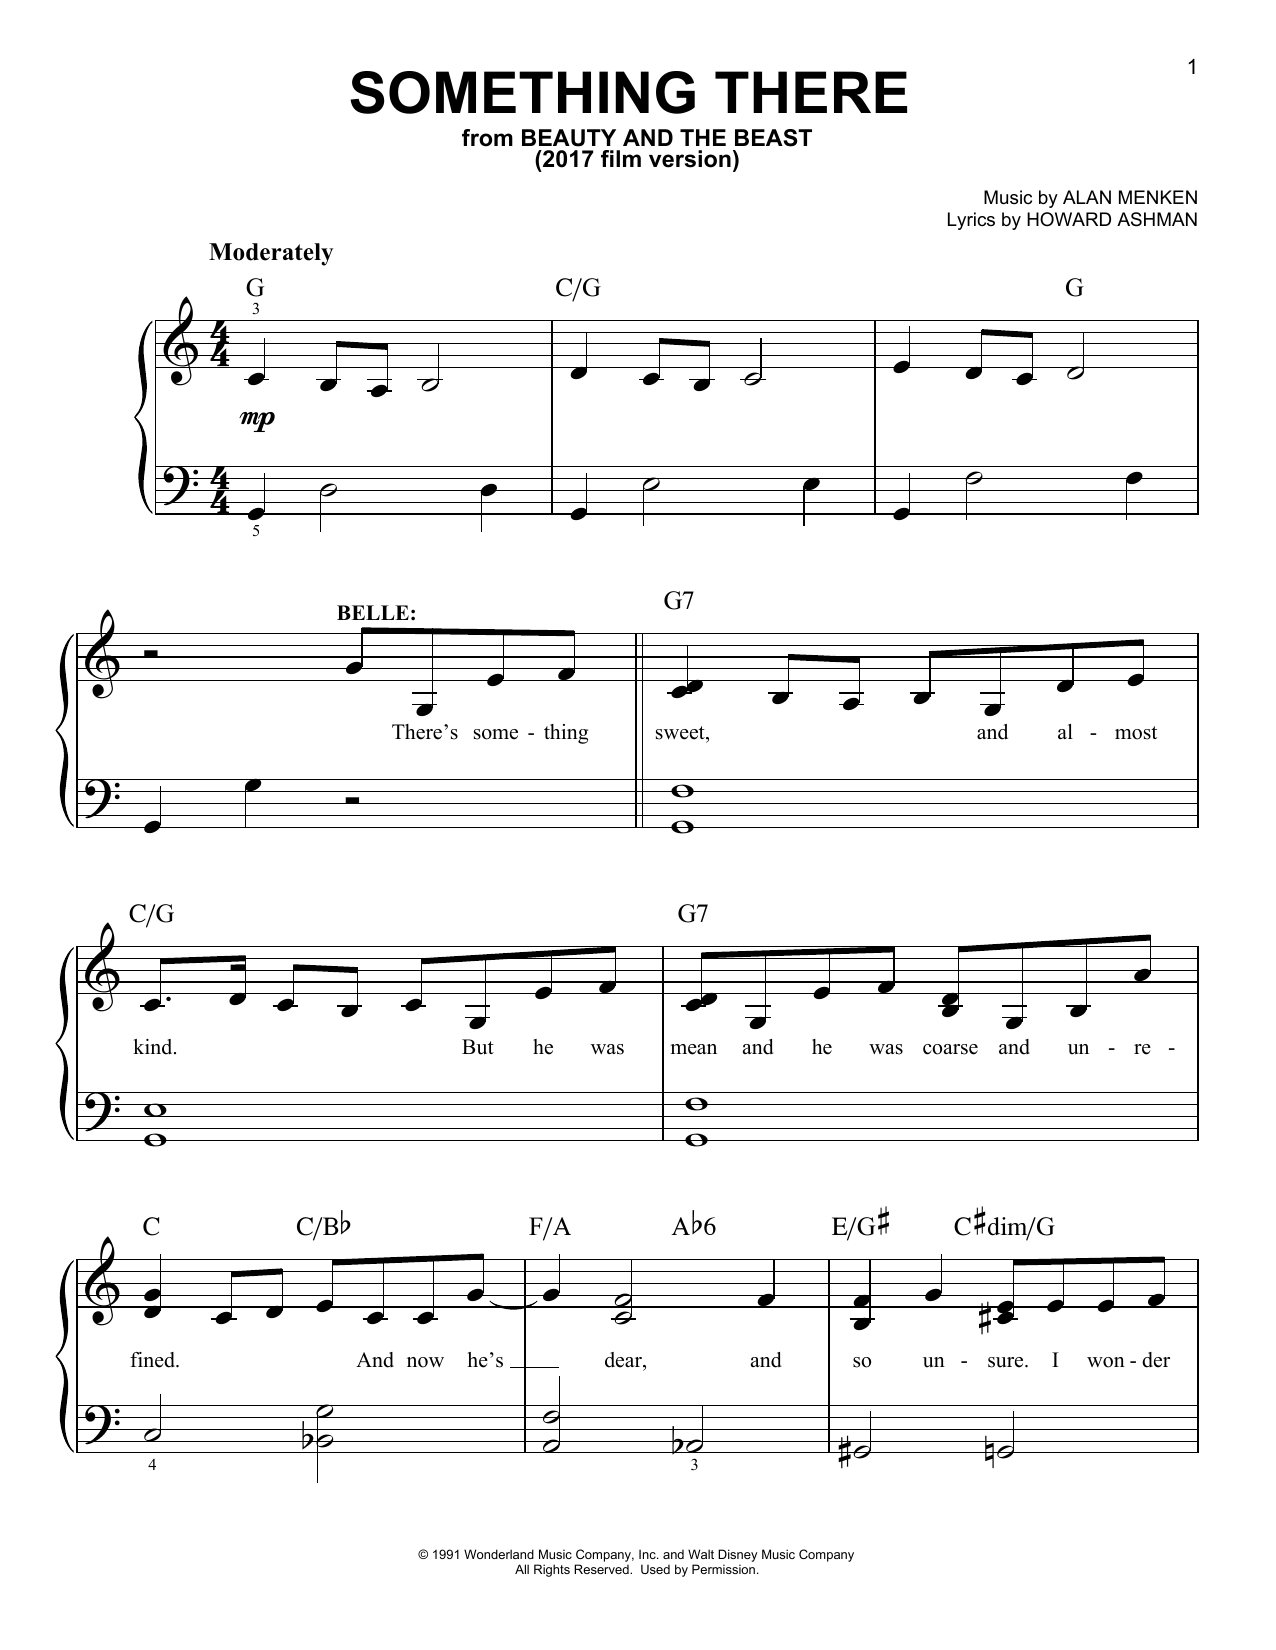 Beauty and Beast Cast "Something There (from Beauty And The Beast)" Sheet Music | Download Printable PDF Score How To Play On Ukulele? SKU 185451